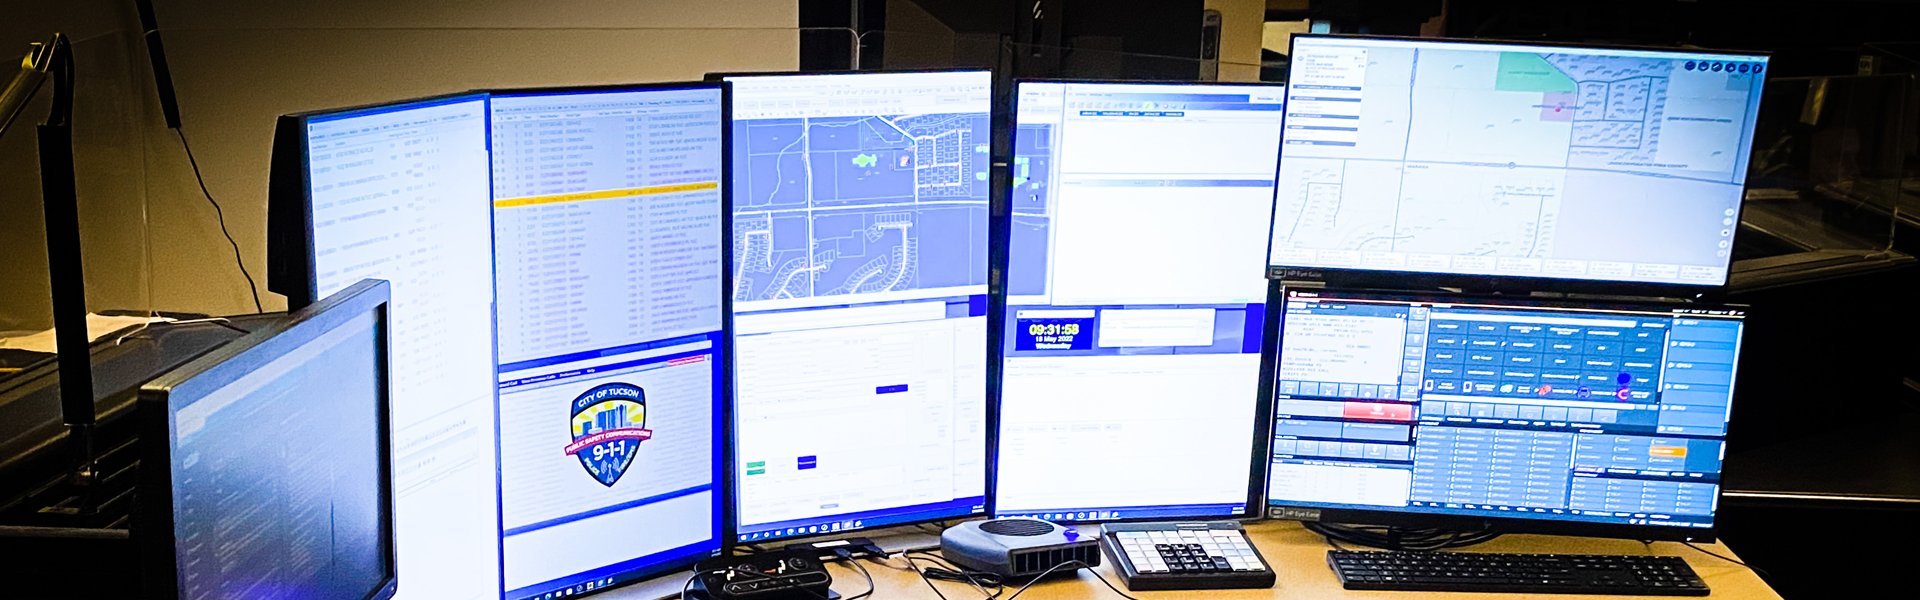 5-7 monitors set up for 911 call operator